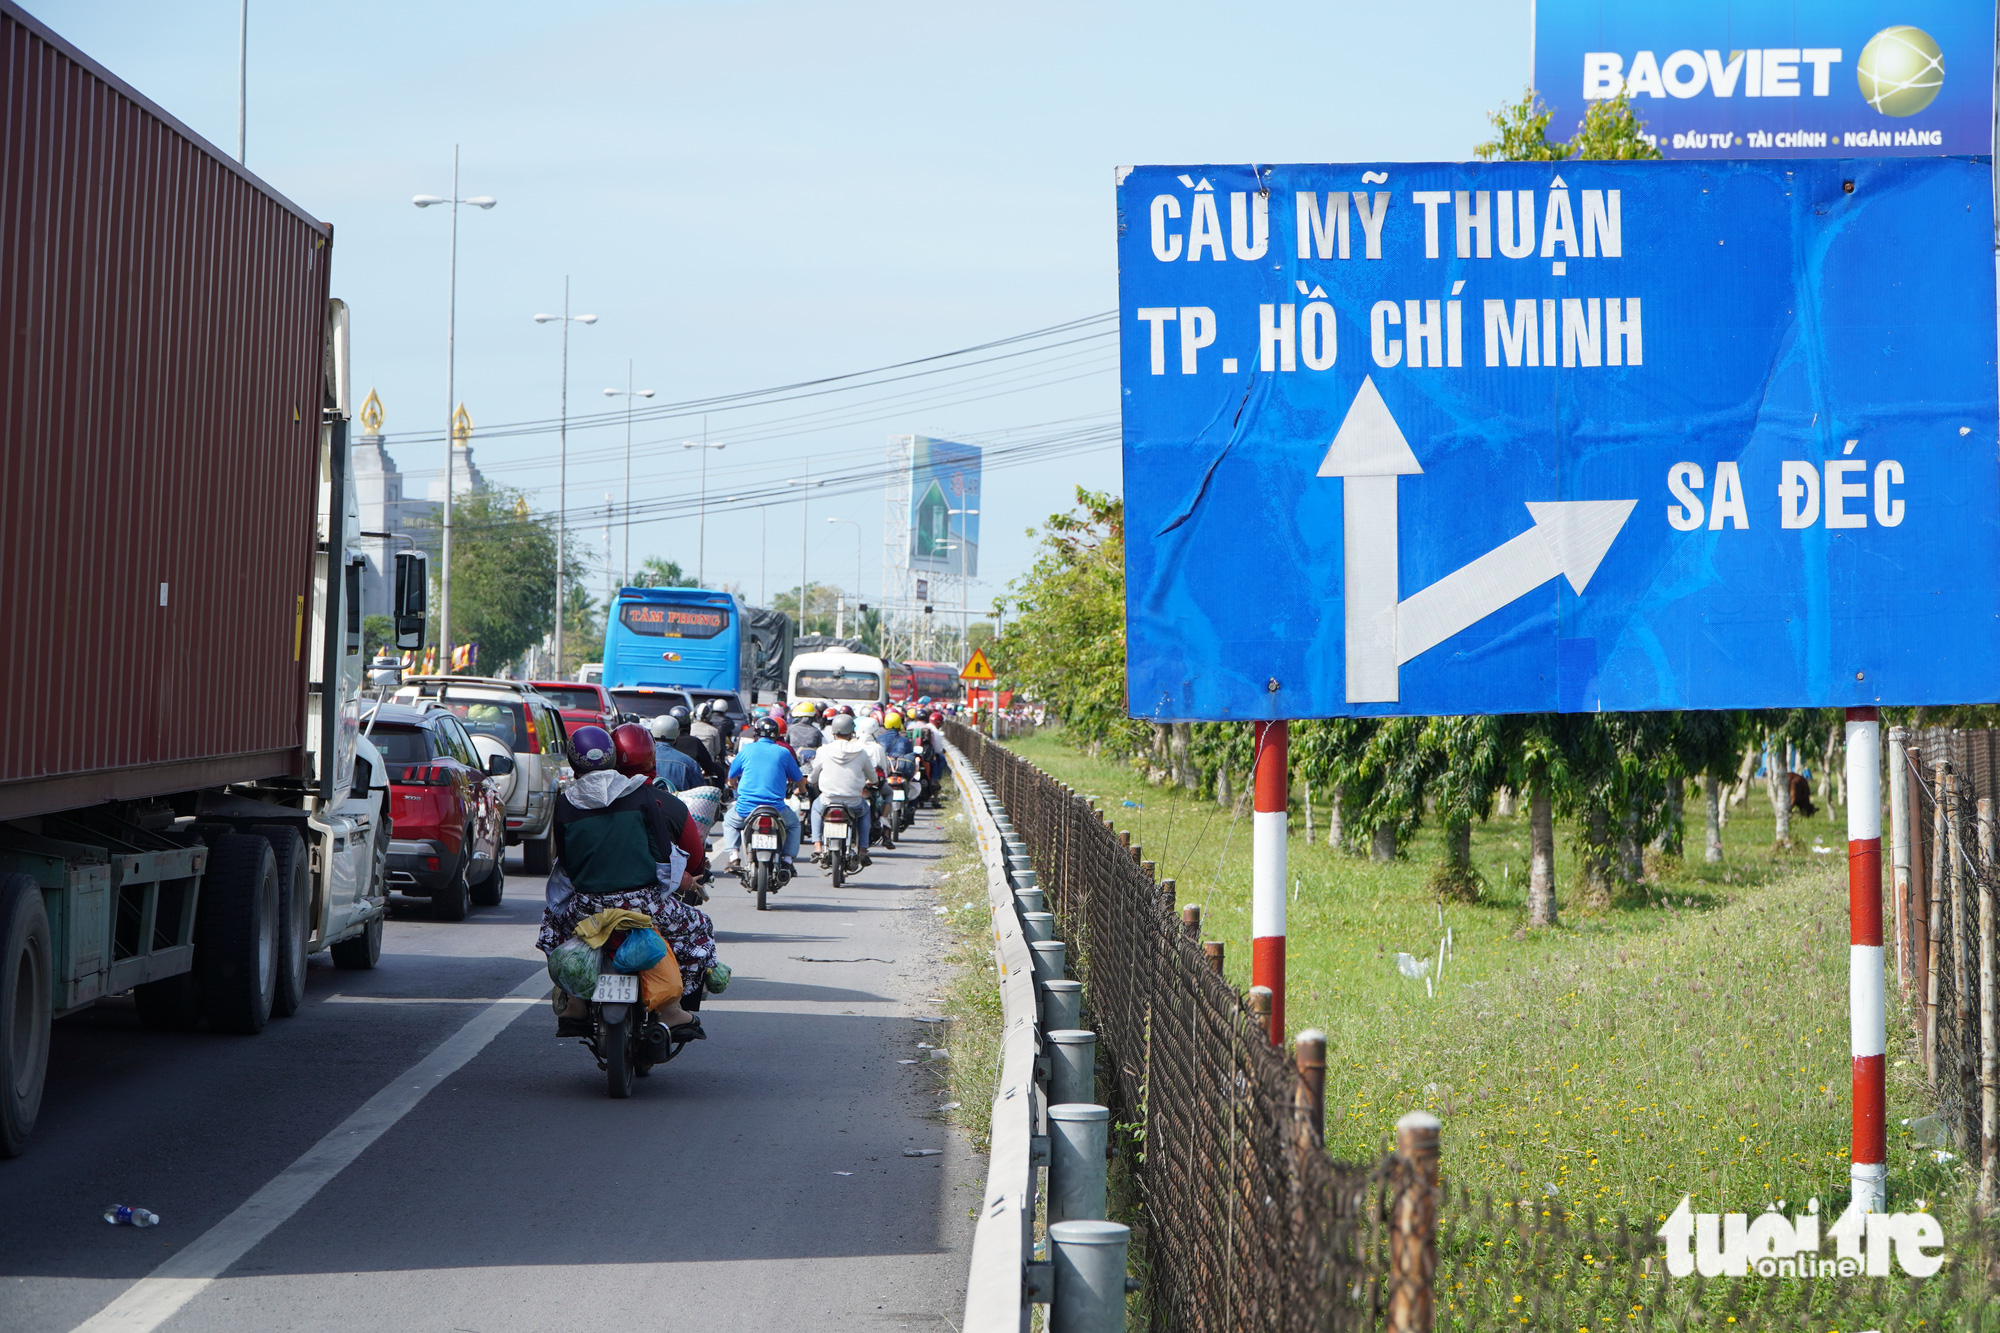 The approach road to the My Thuan Bridge is narrow, causing a bottleneck. Photo: Chi Hanh / Tuoi Tre